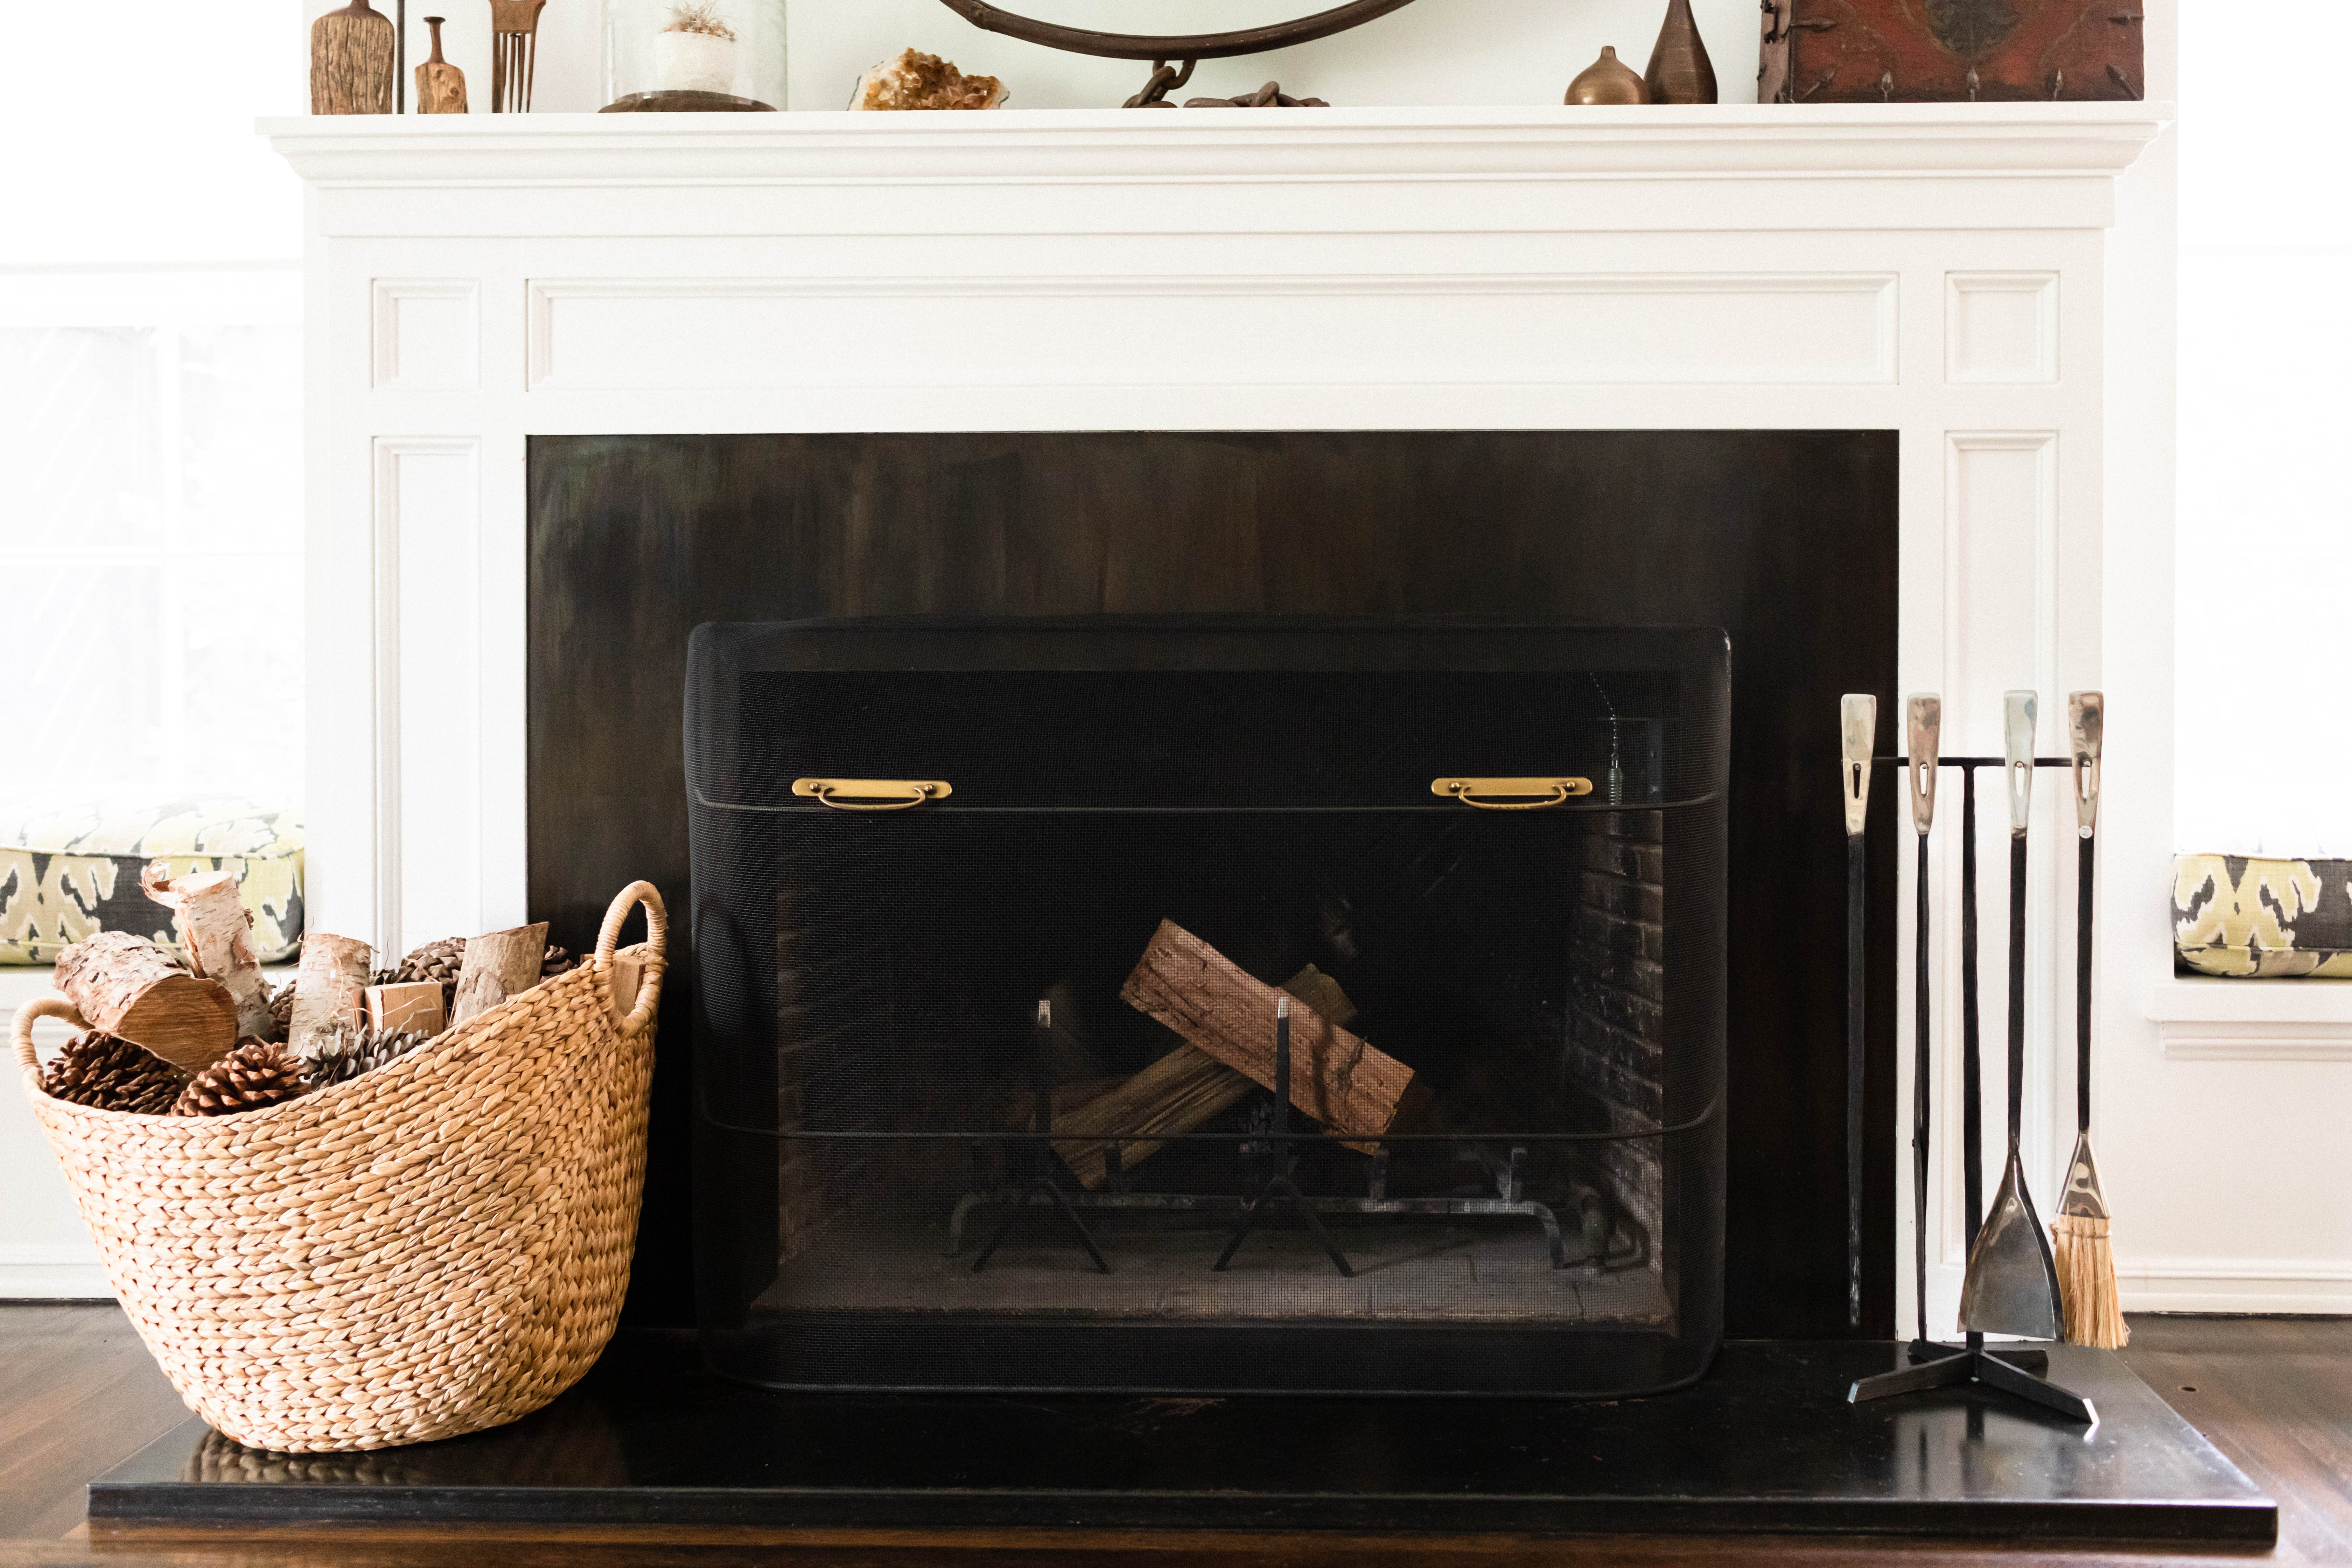 How to heat your house with just a wood burning stove